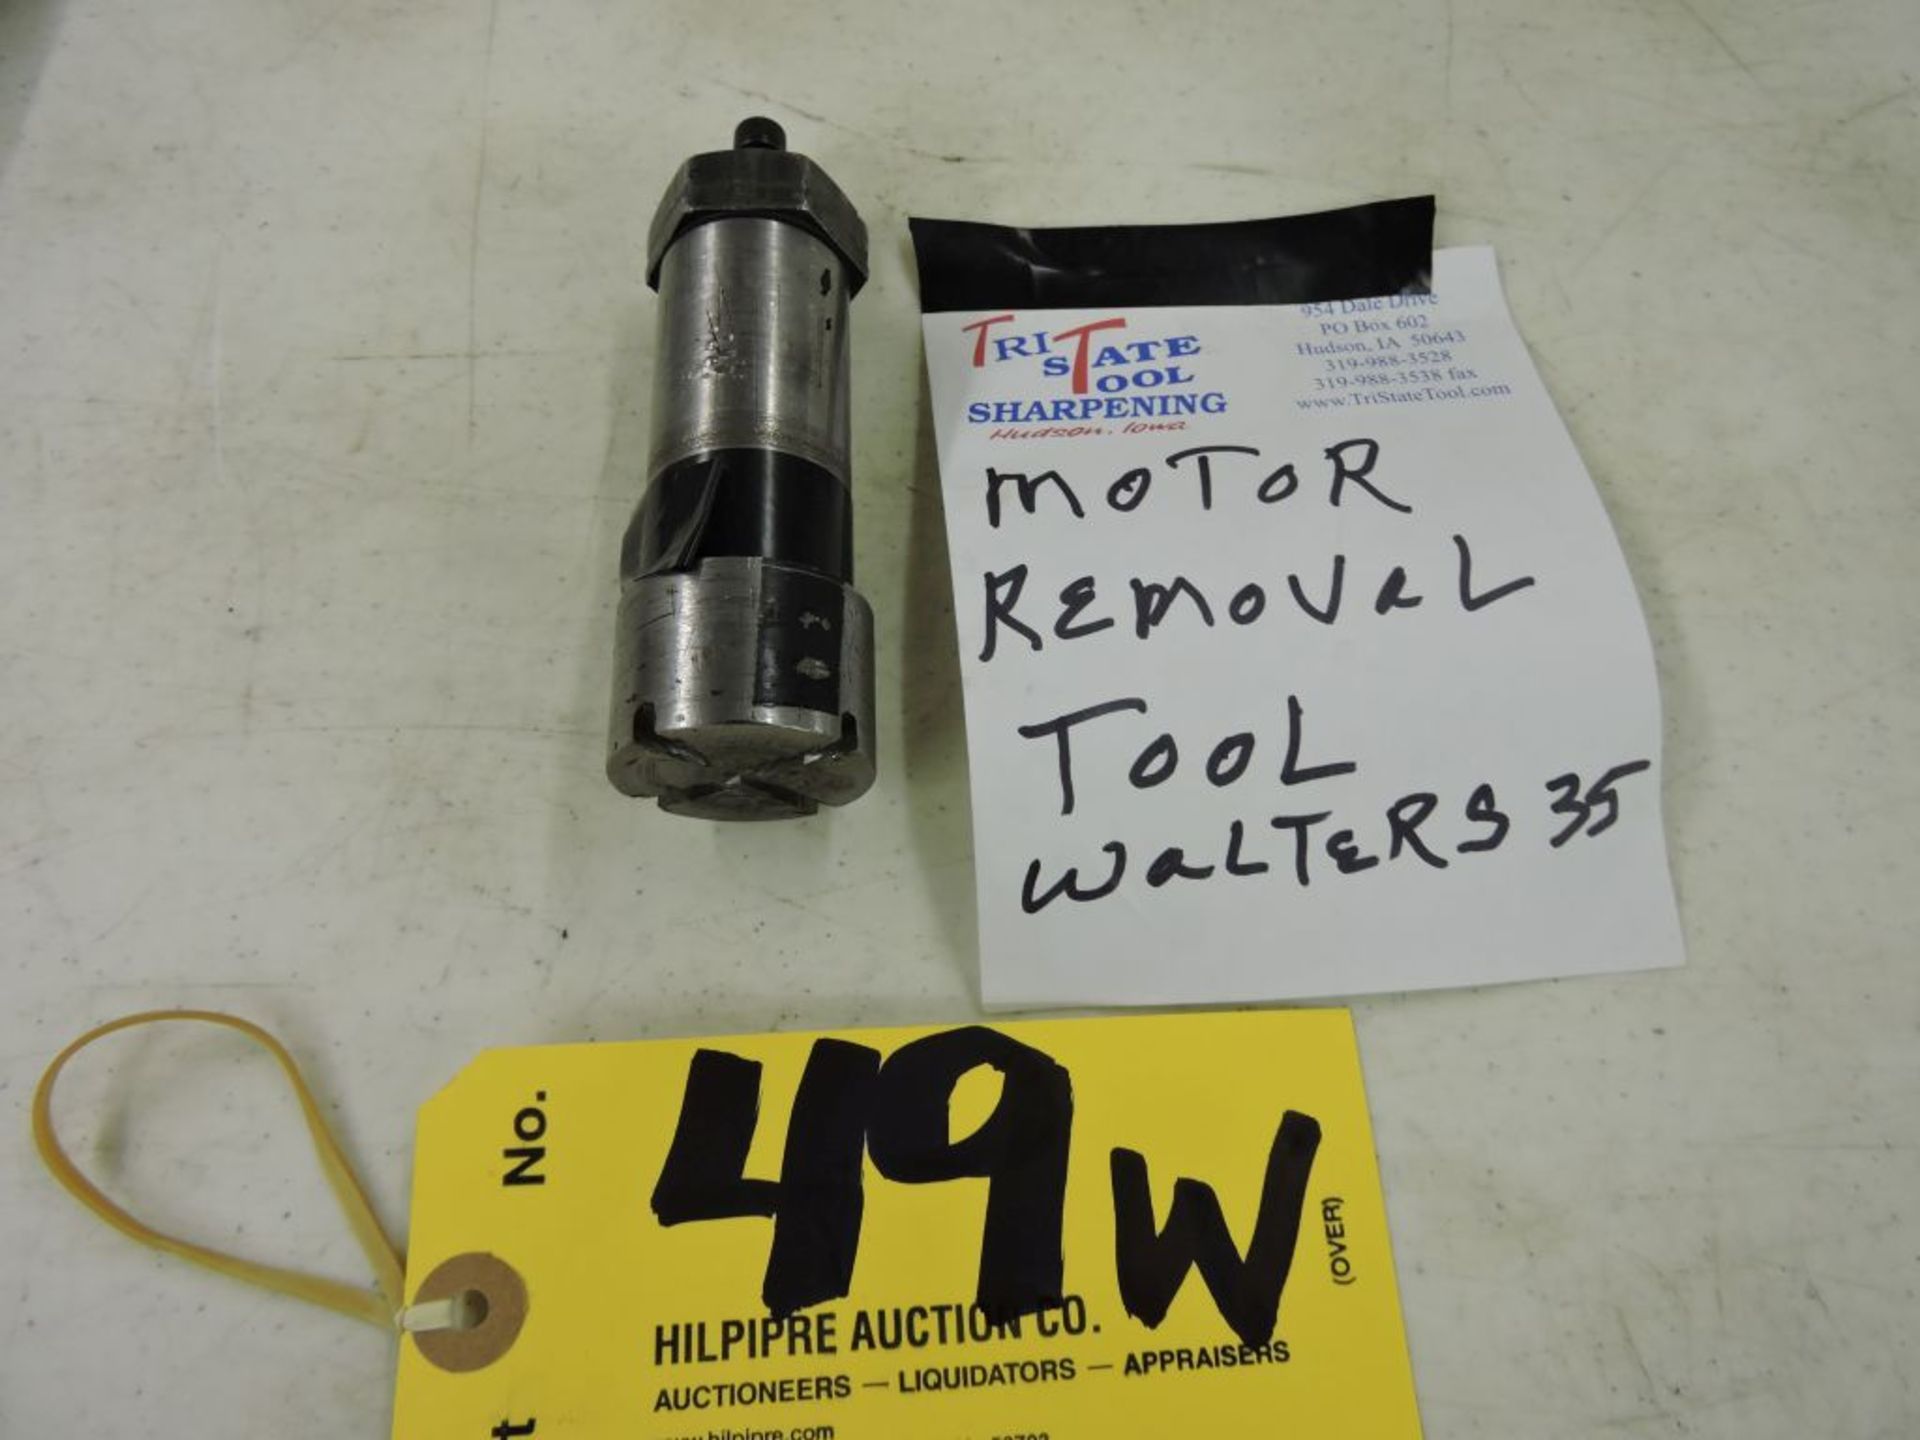 Fits Walters 35: Motor removal tool, shopmade.